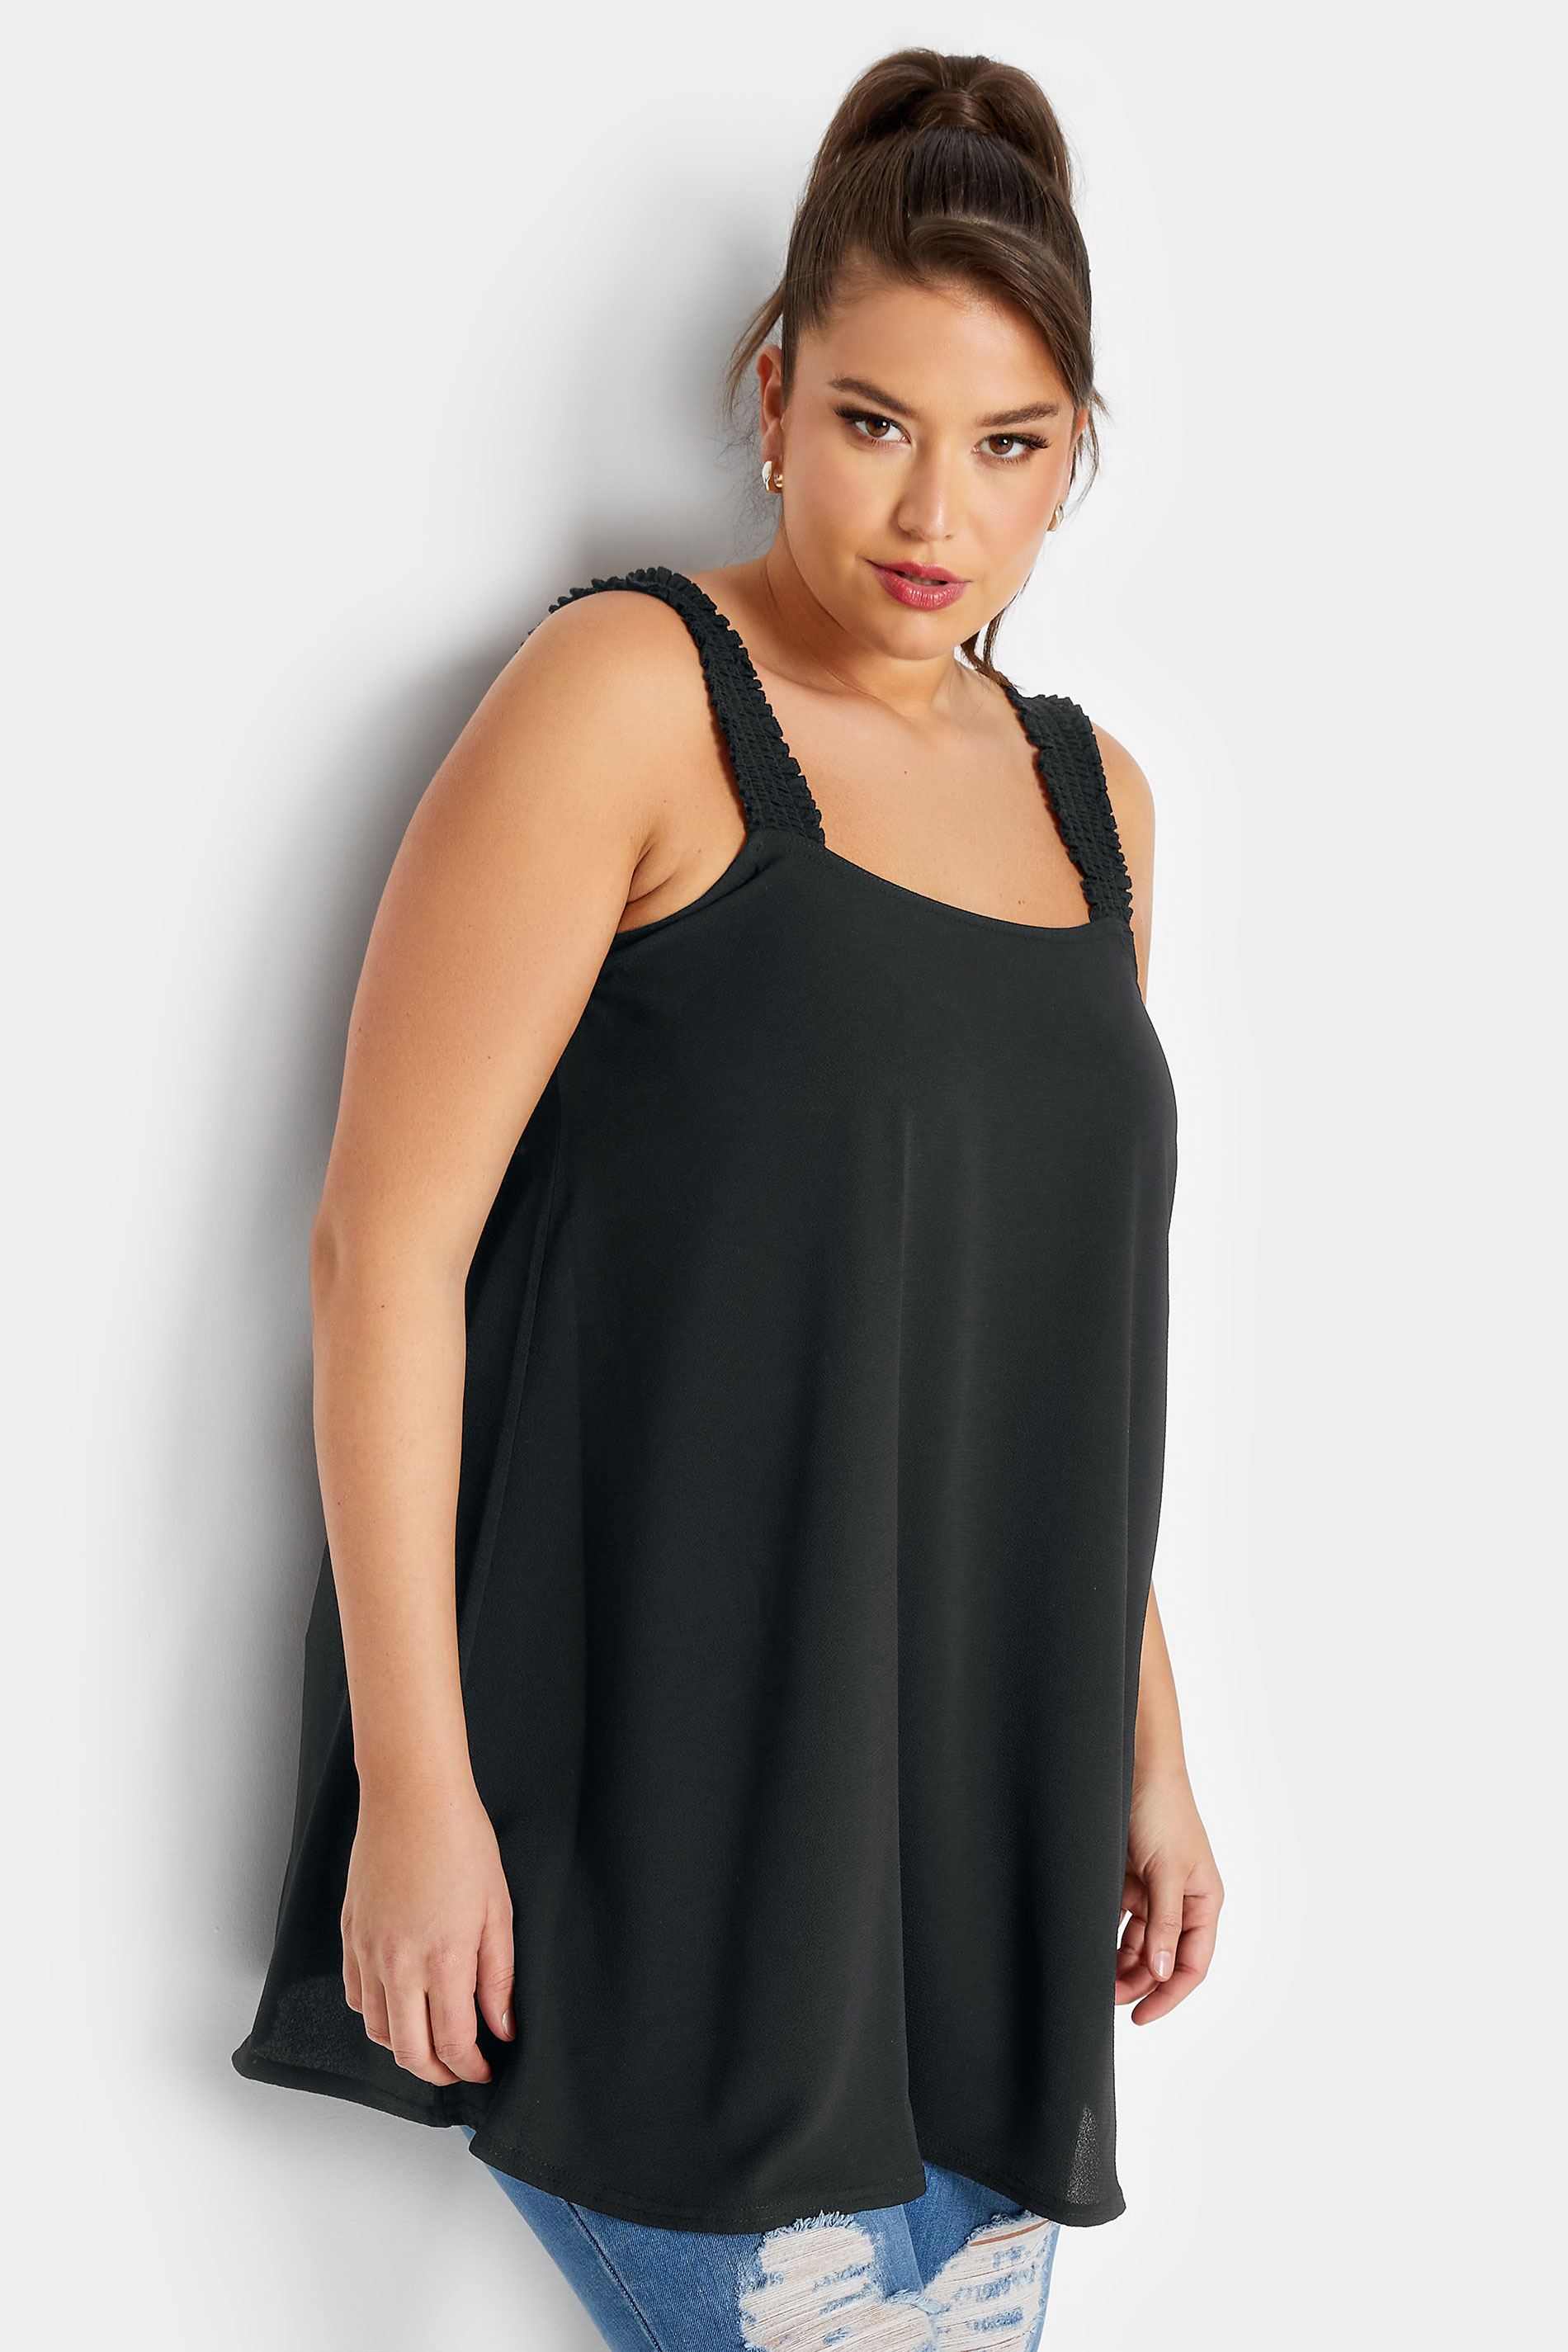 LIMITED COLLECTION Plus Size Black Shirred Strap Cami Vest Top | Yours Clothing 3